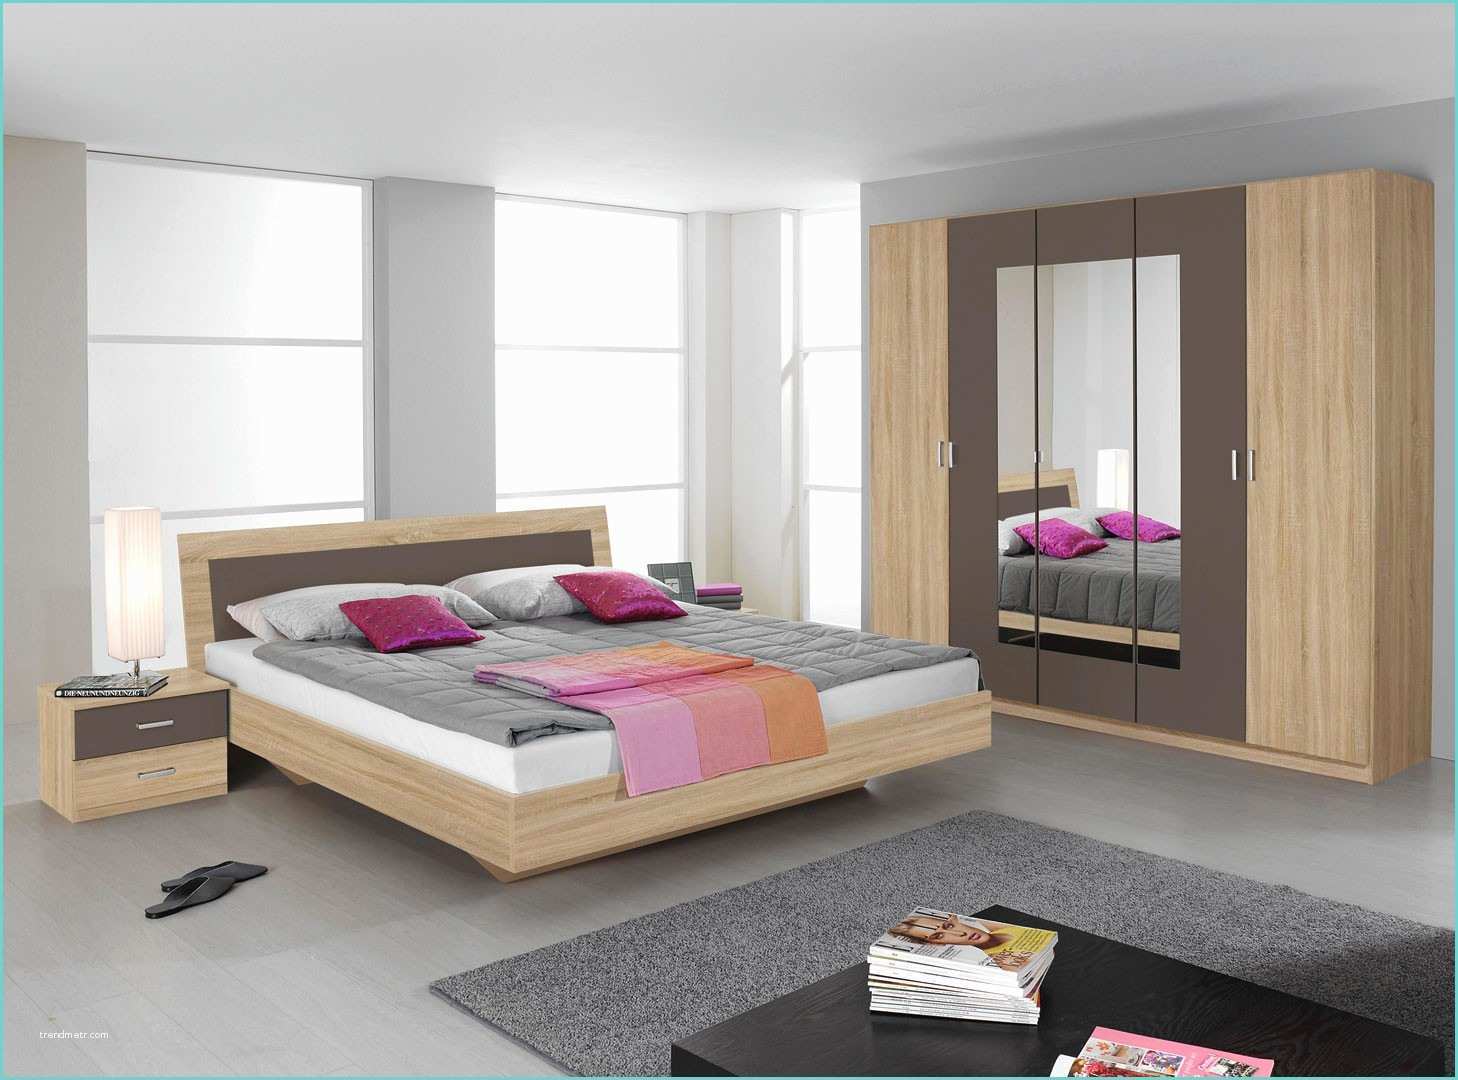 Chambre A Coucher Italienne Pas Cher Stunning Chambre Italienne Pas Cher S Design Trends